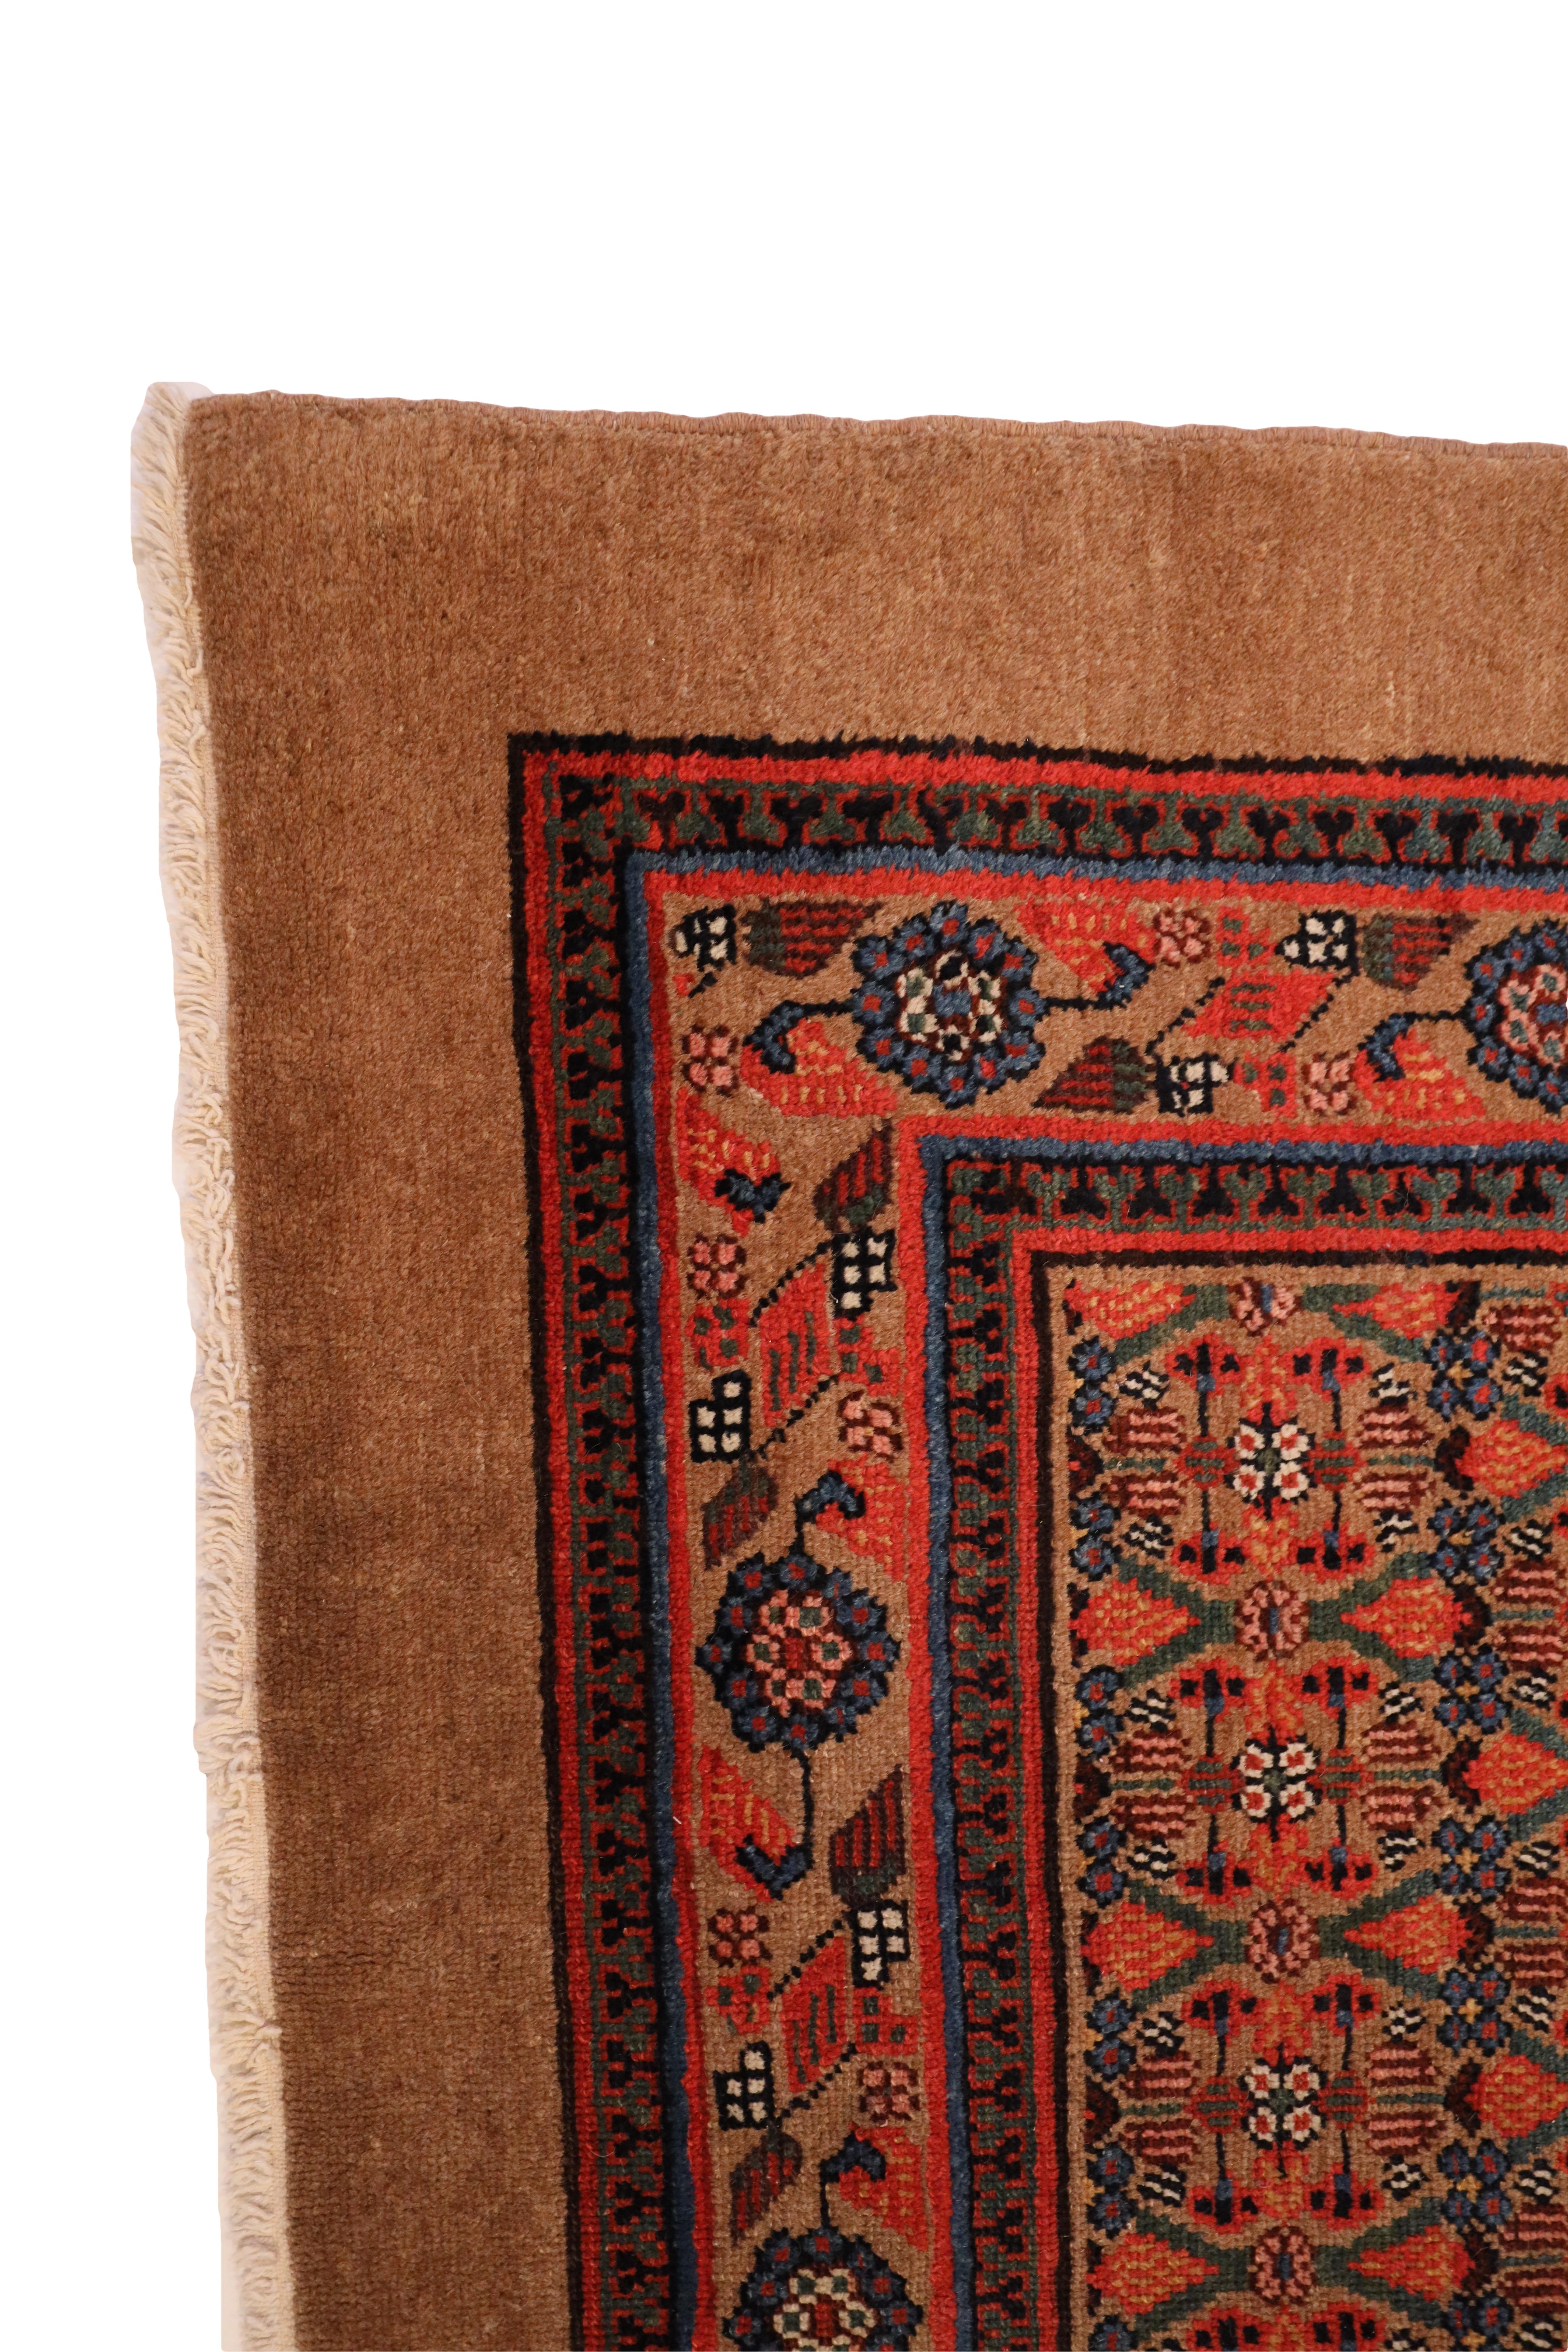 This antique Hamedan camel hair rug is a true gem, showcasing the timeless beauty of traditional Persian rug weaving. The rug features a deep beige camel hair color that exudes warmth and richness, creating a luxurious foundation for its intricate